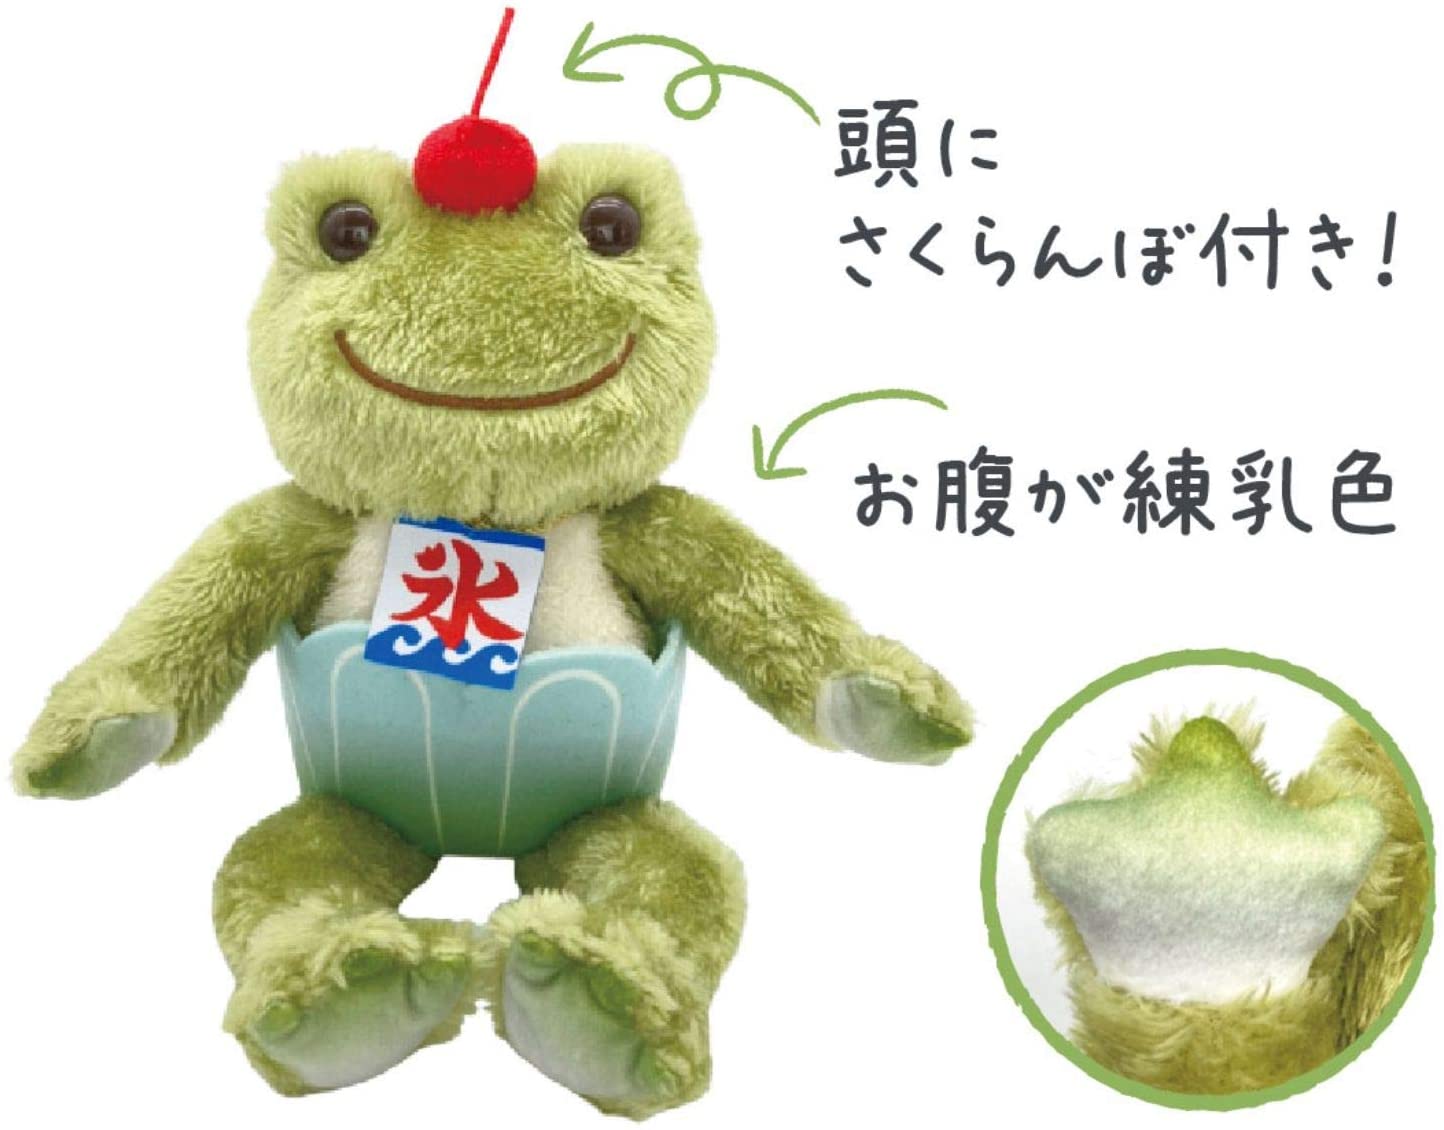 Pickles the Frog Bean Doll Plush Shaved Ice Matcha Condensed Milk